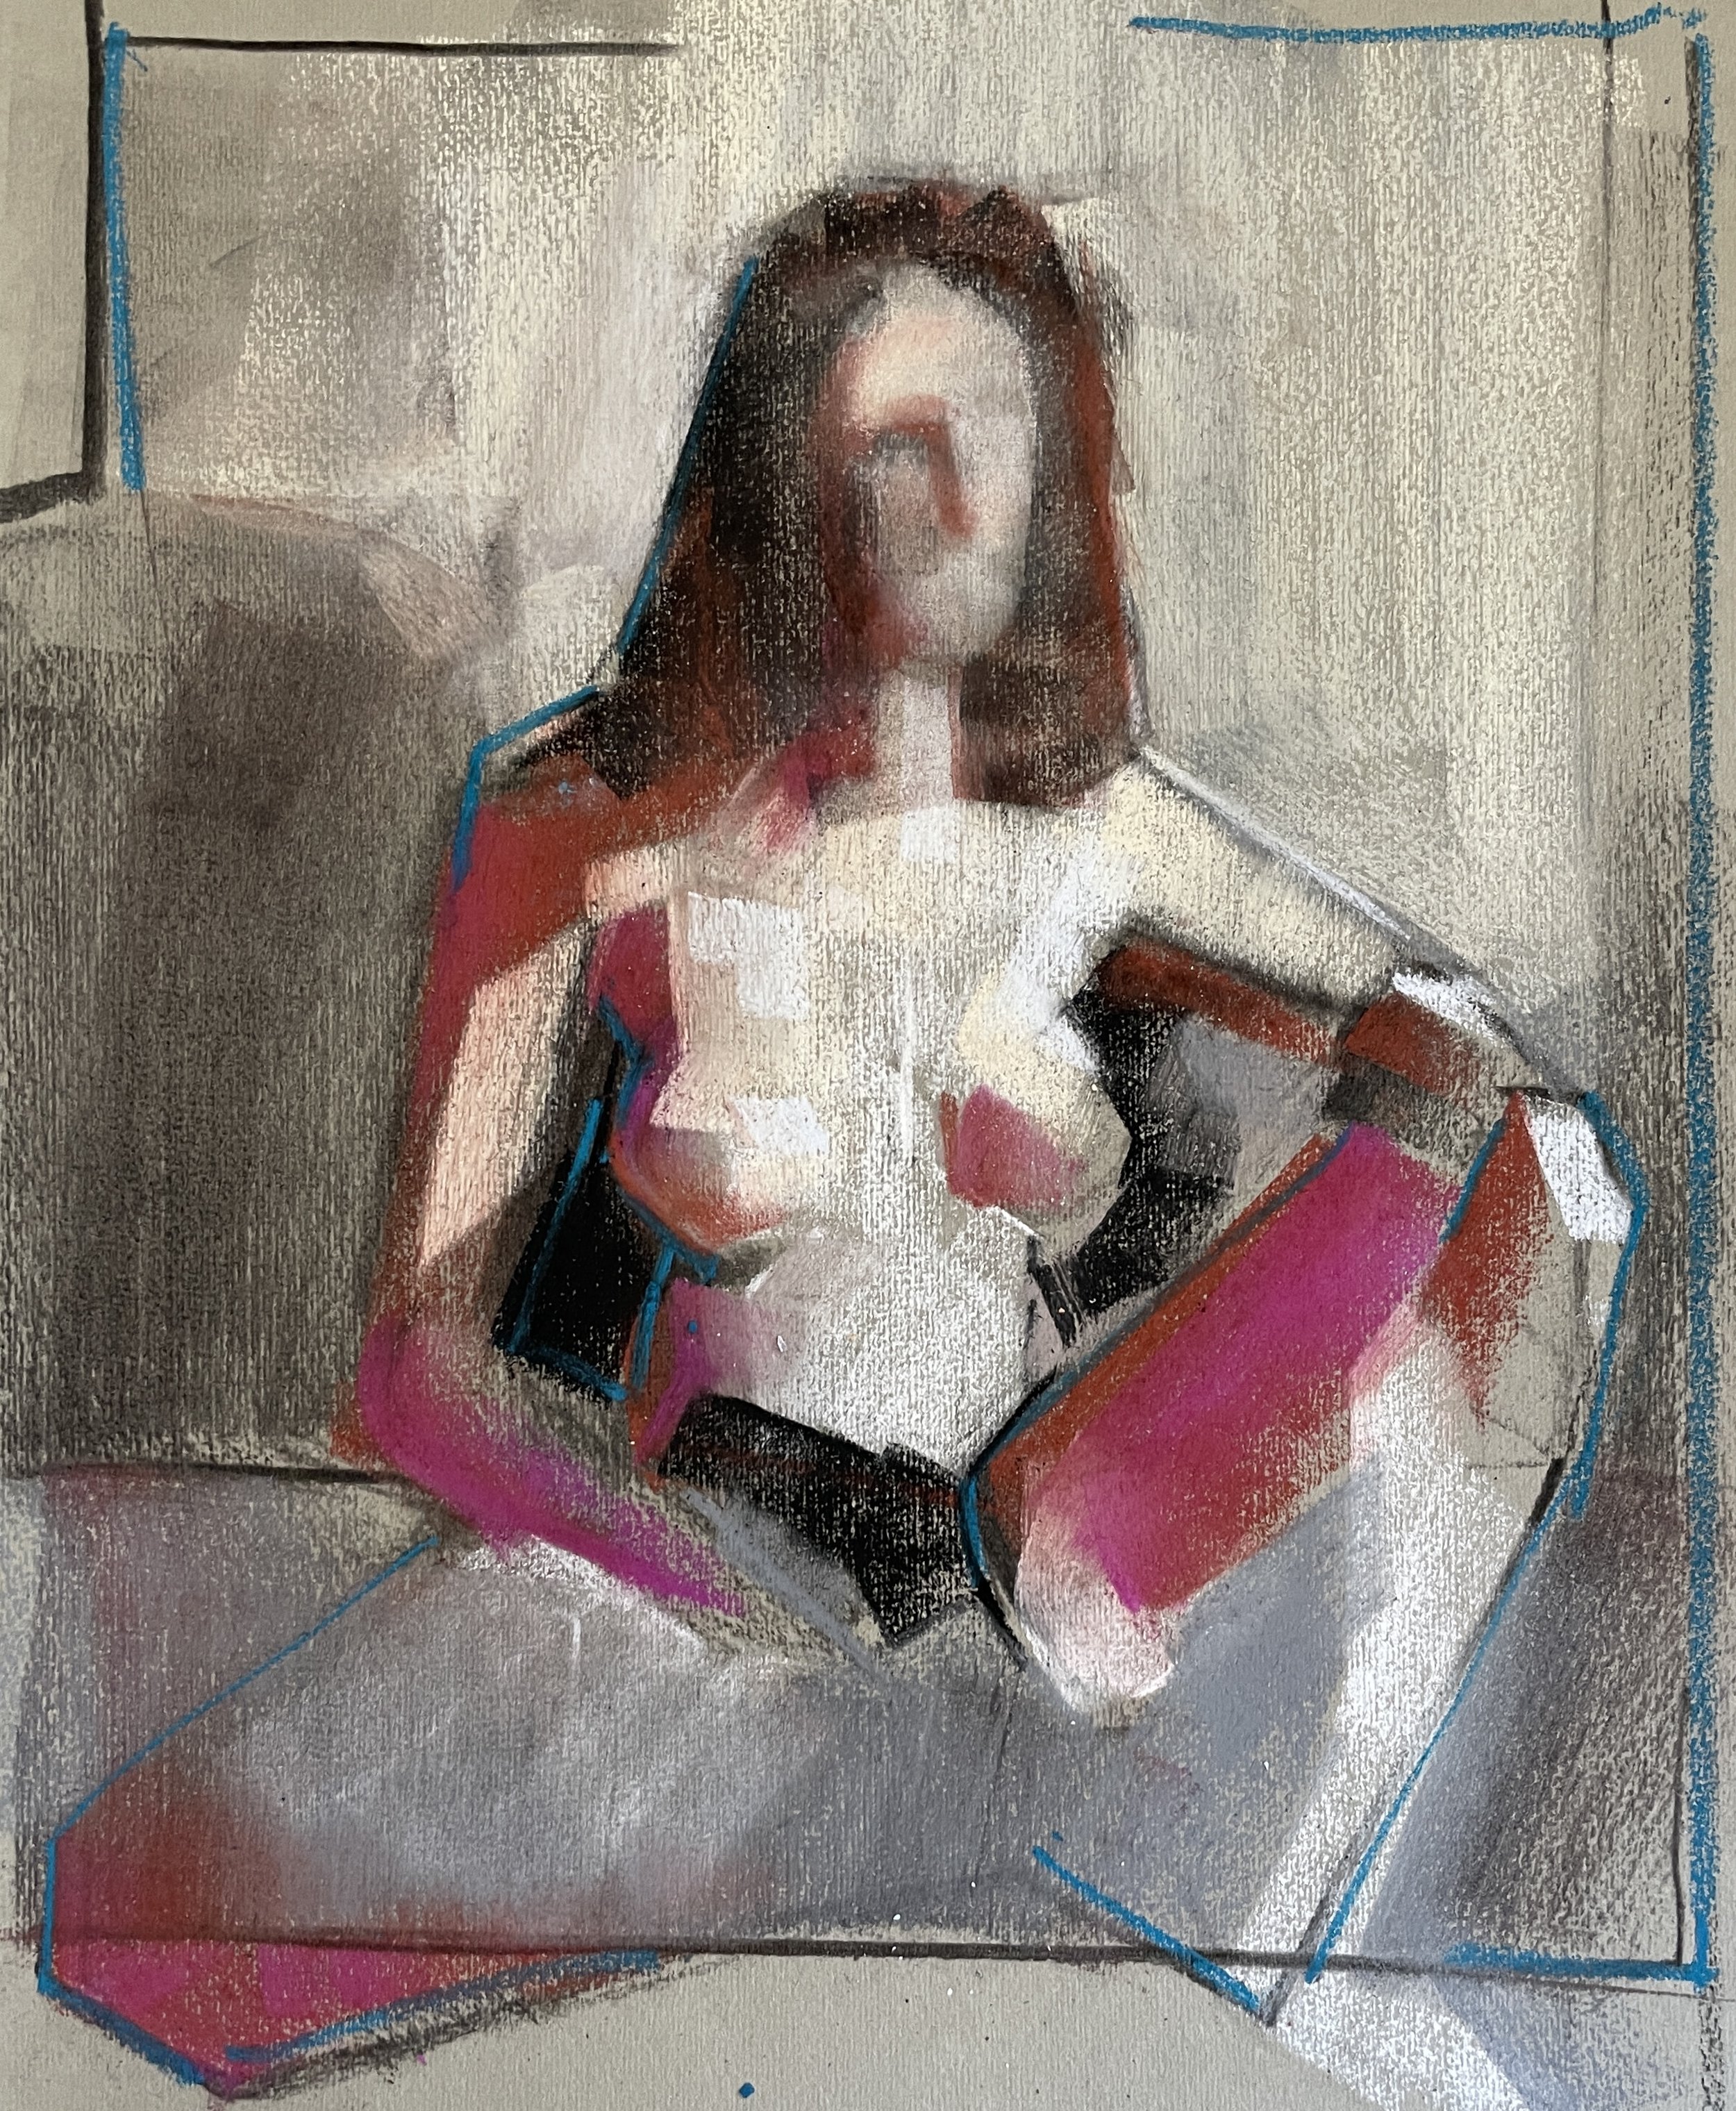 C.M. Seated, Pastel, 10 by 14 inches, 2022.